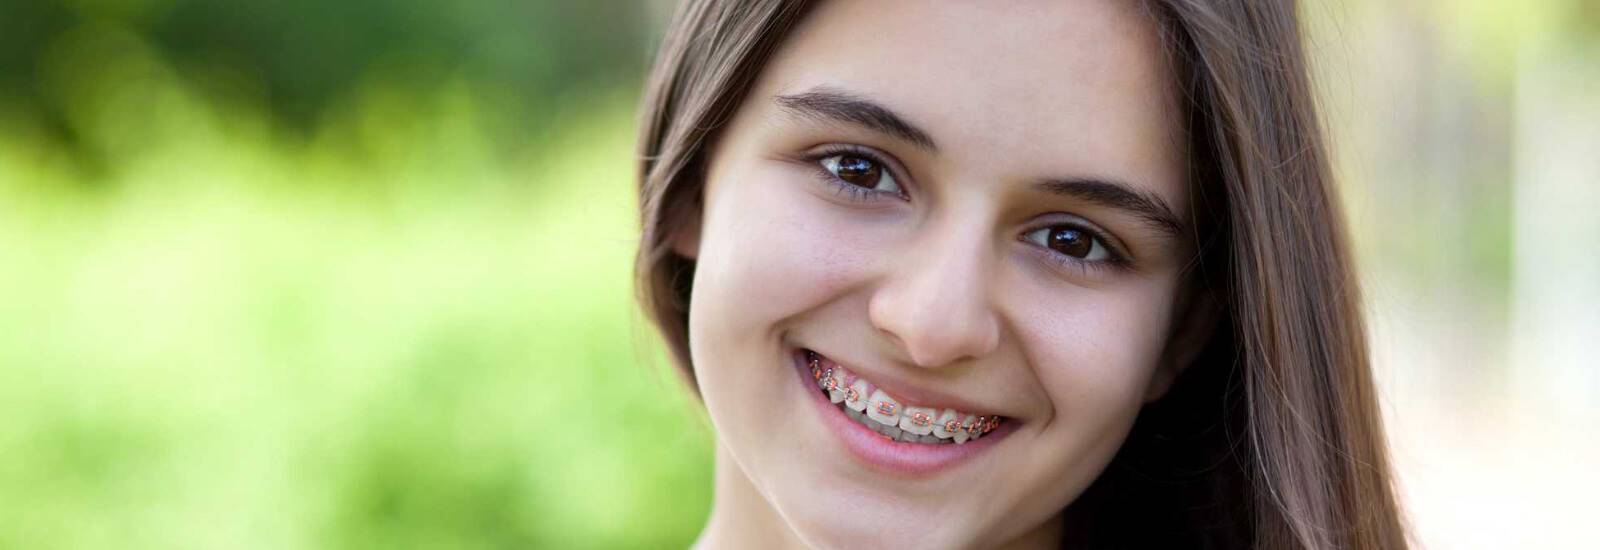 Metal Braces as An Orthodontic Treatment: A Qualified Orthodontist